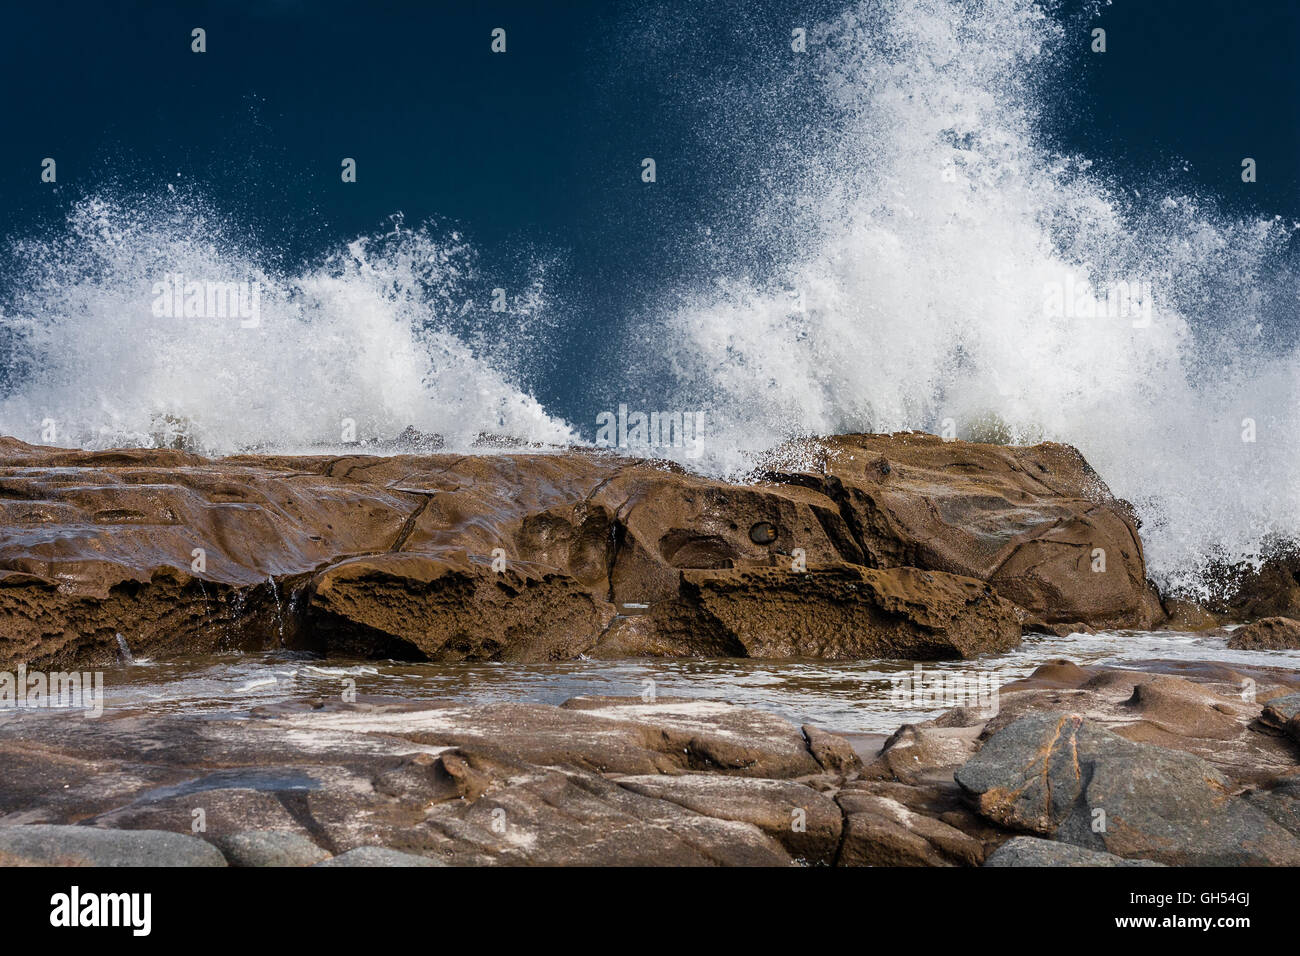 View of a crashing wave on the rocks Stock Photo